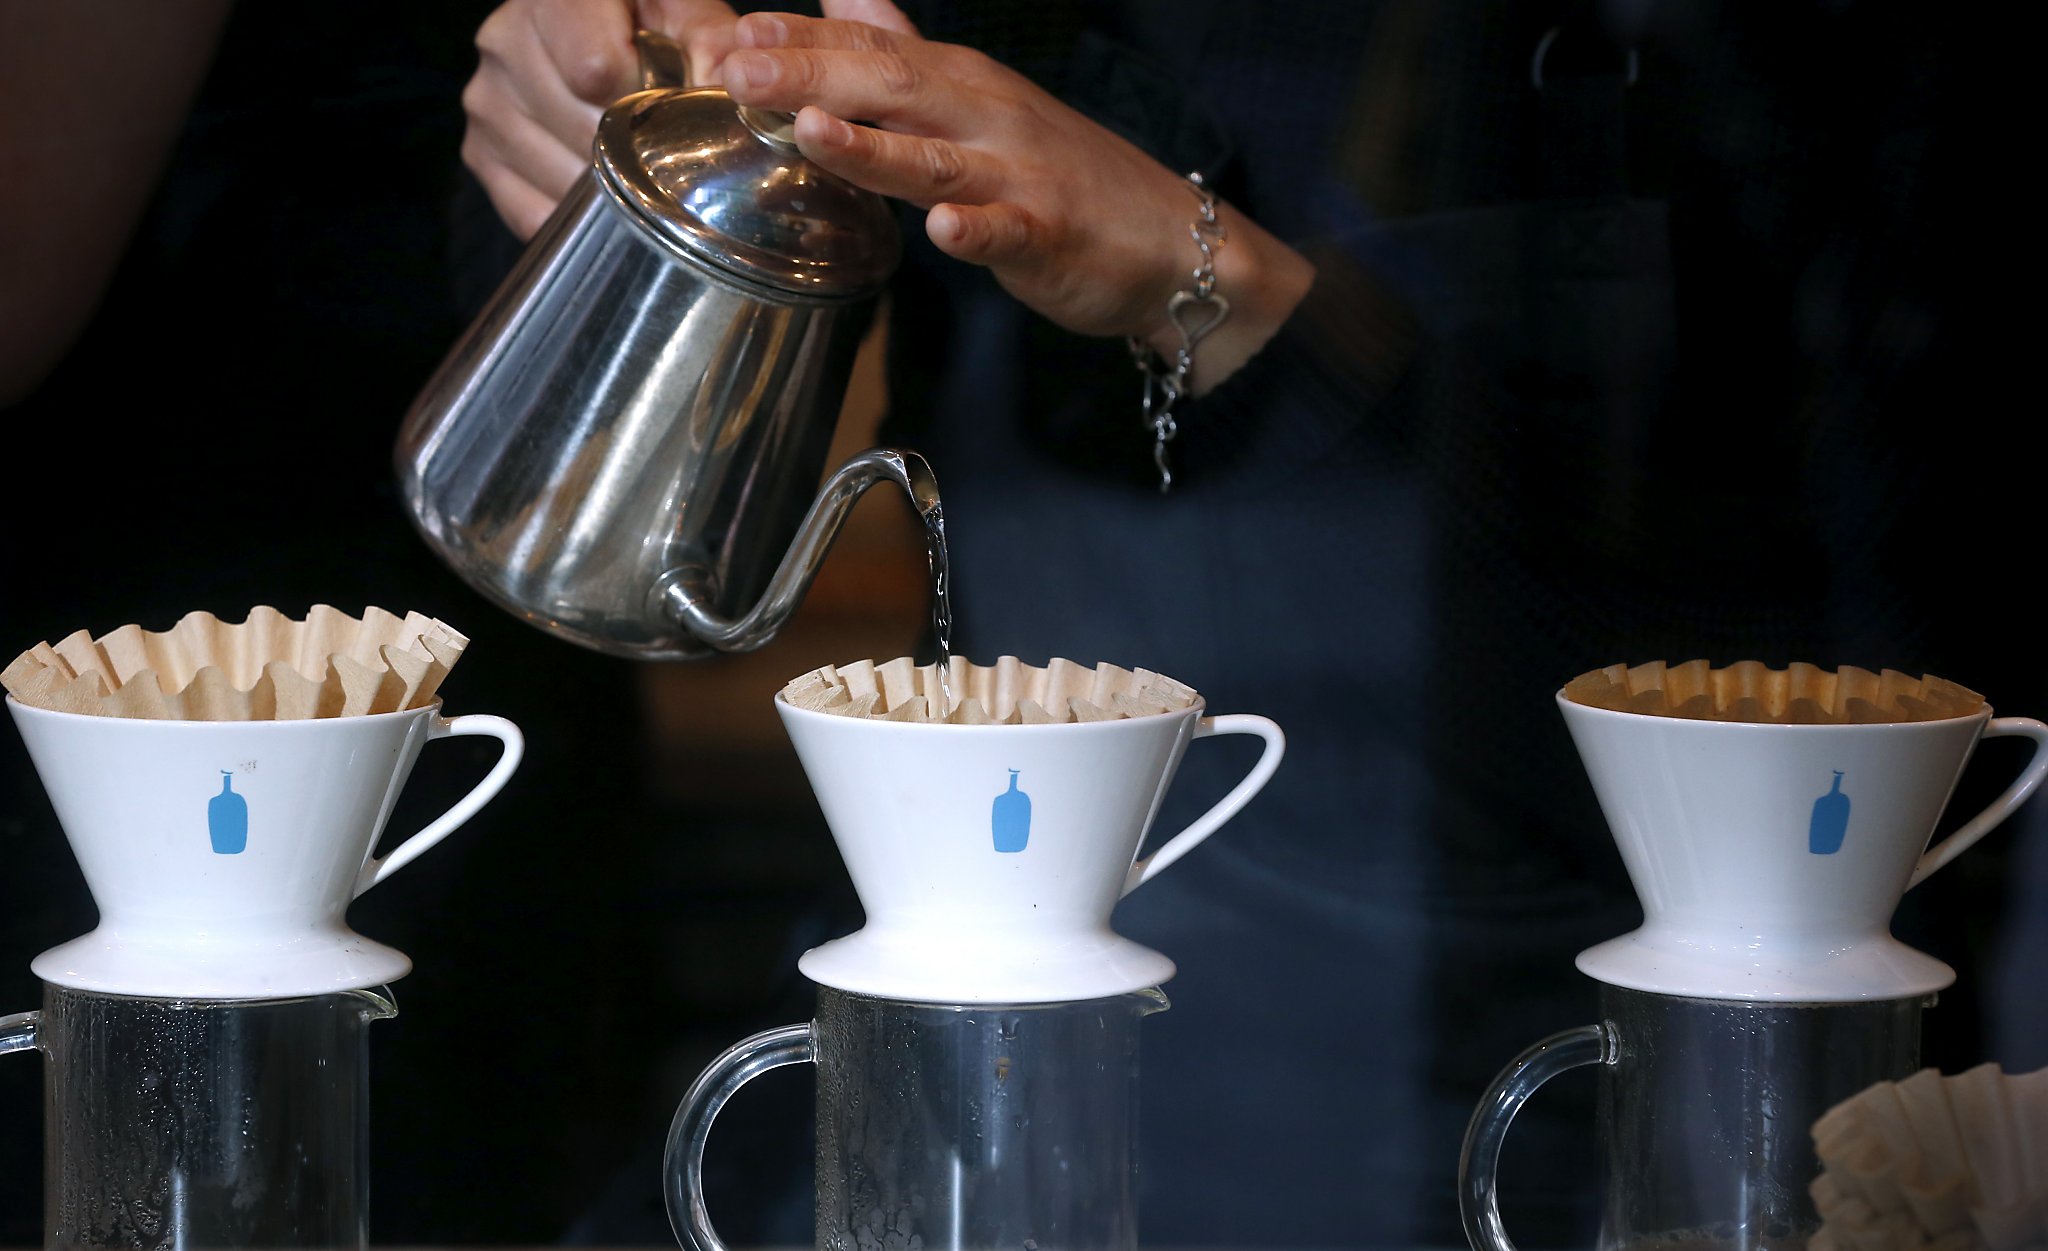 Blue Bottle Coffee went from single coffee cart to $700 million brand